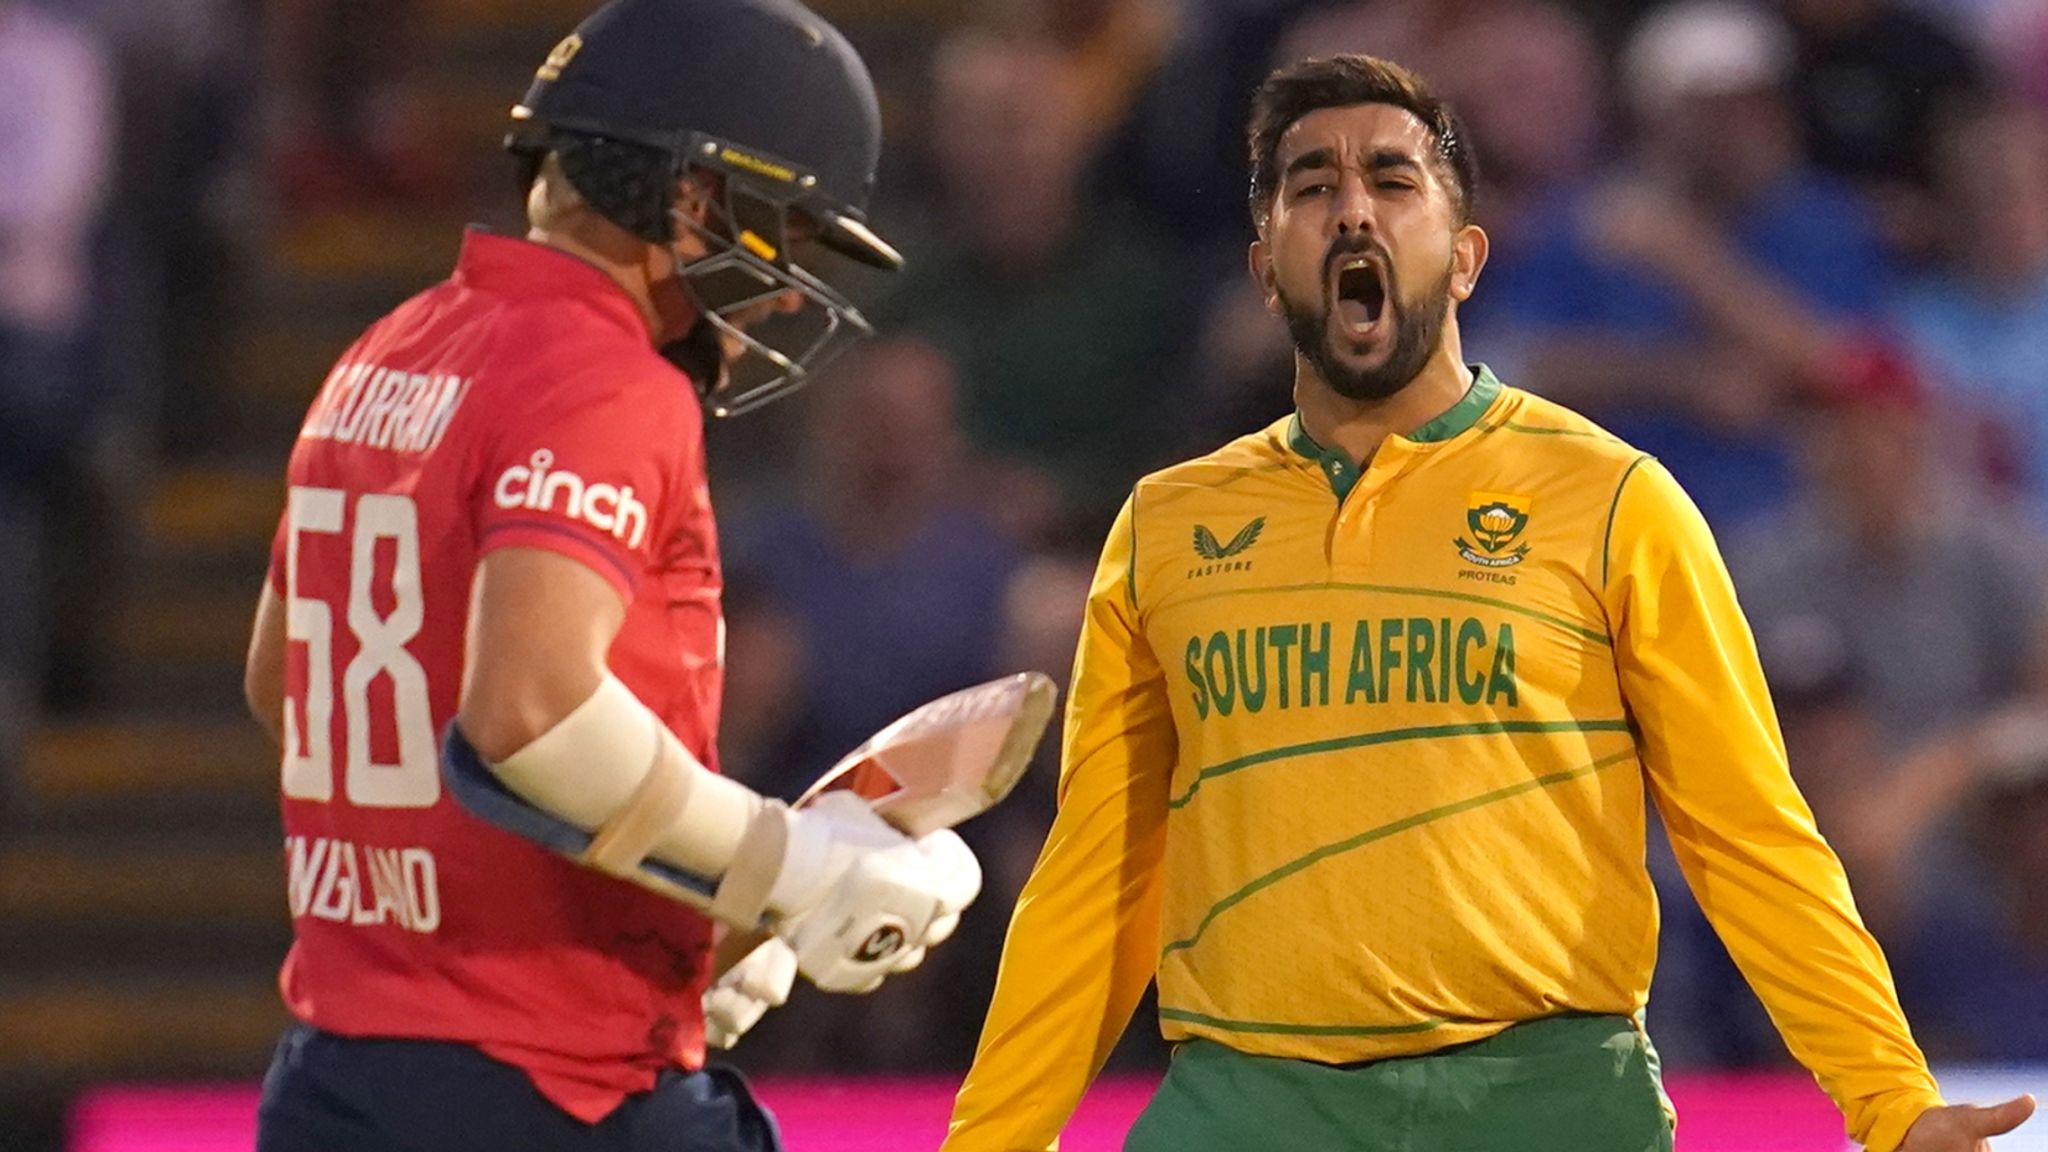 England lose to South Africa by 58 runs in second T20 international as  Proteas set up series decider | Cricket News | Sky Sports